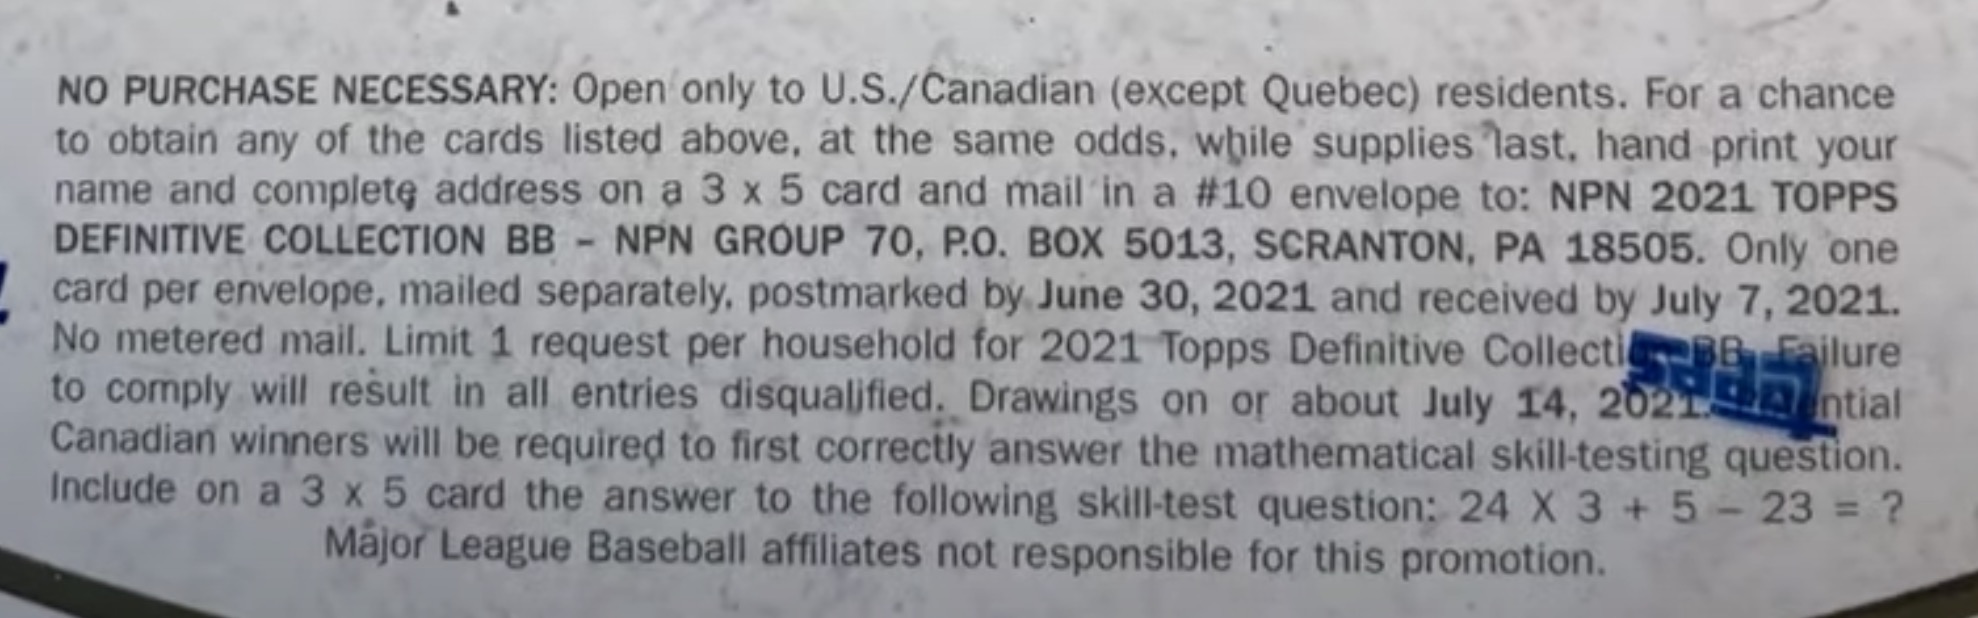 2021 Topps Definitive Collection Baseball Cards - Hobby Box - No Purchase Necessary (NPN) Information